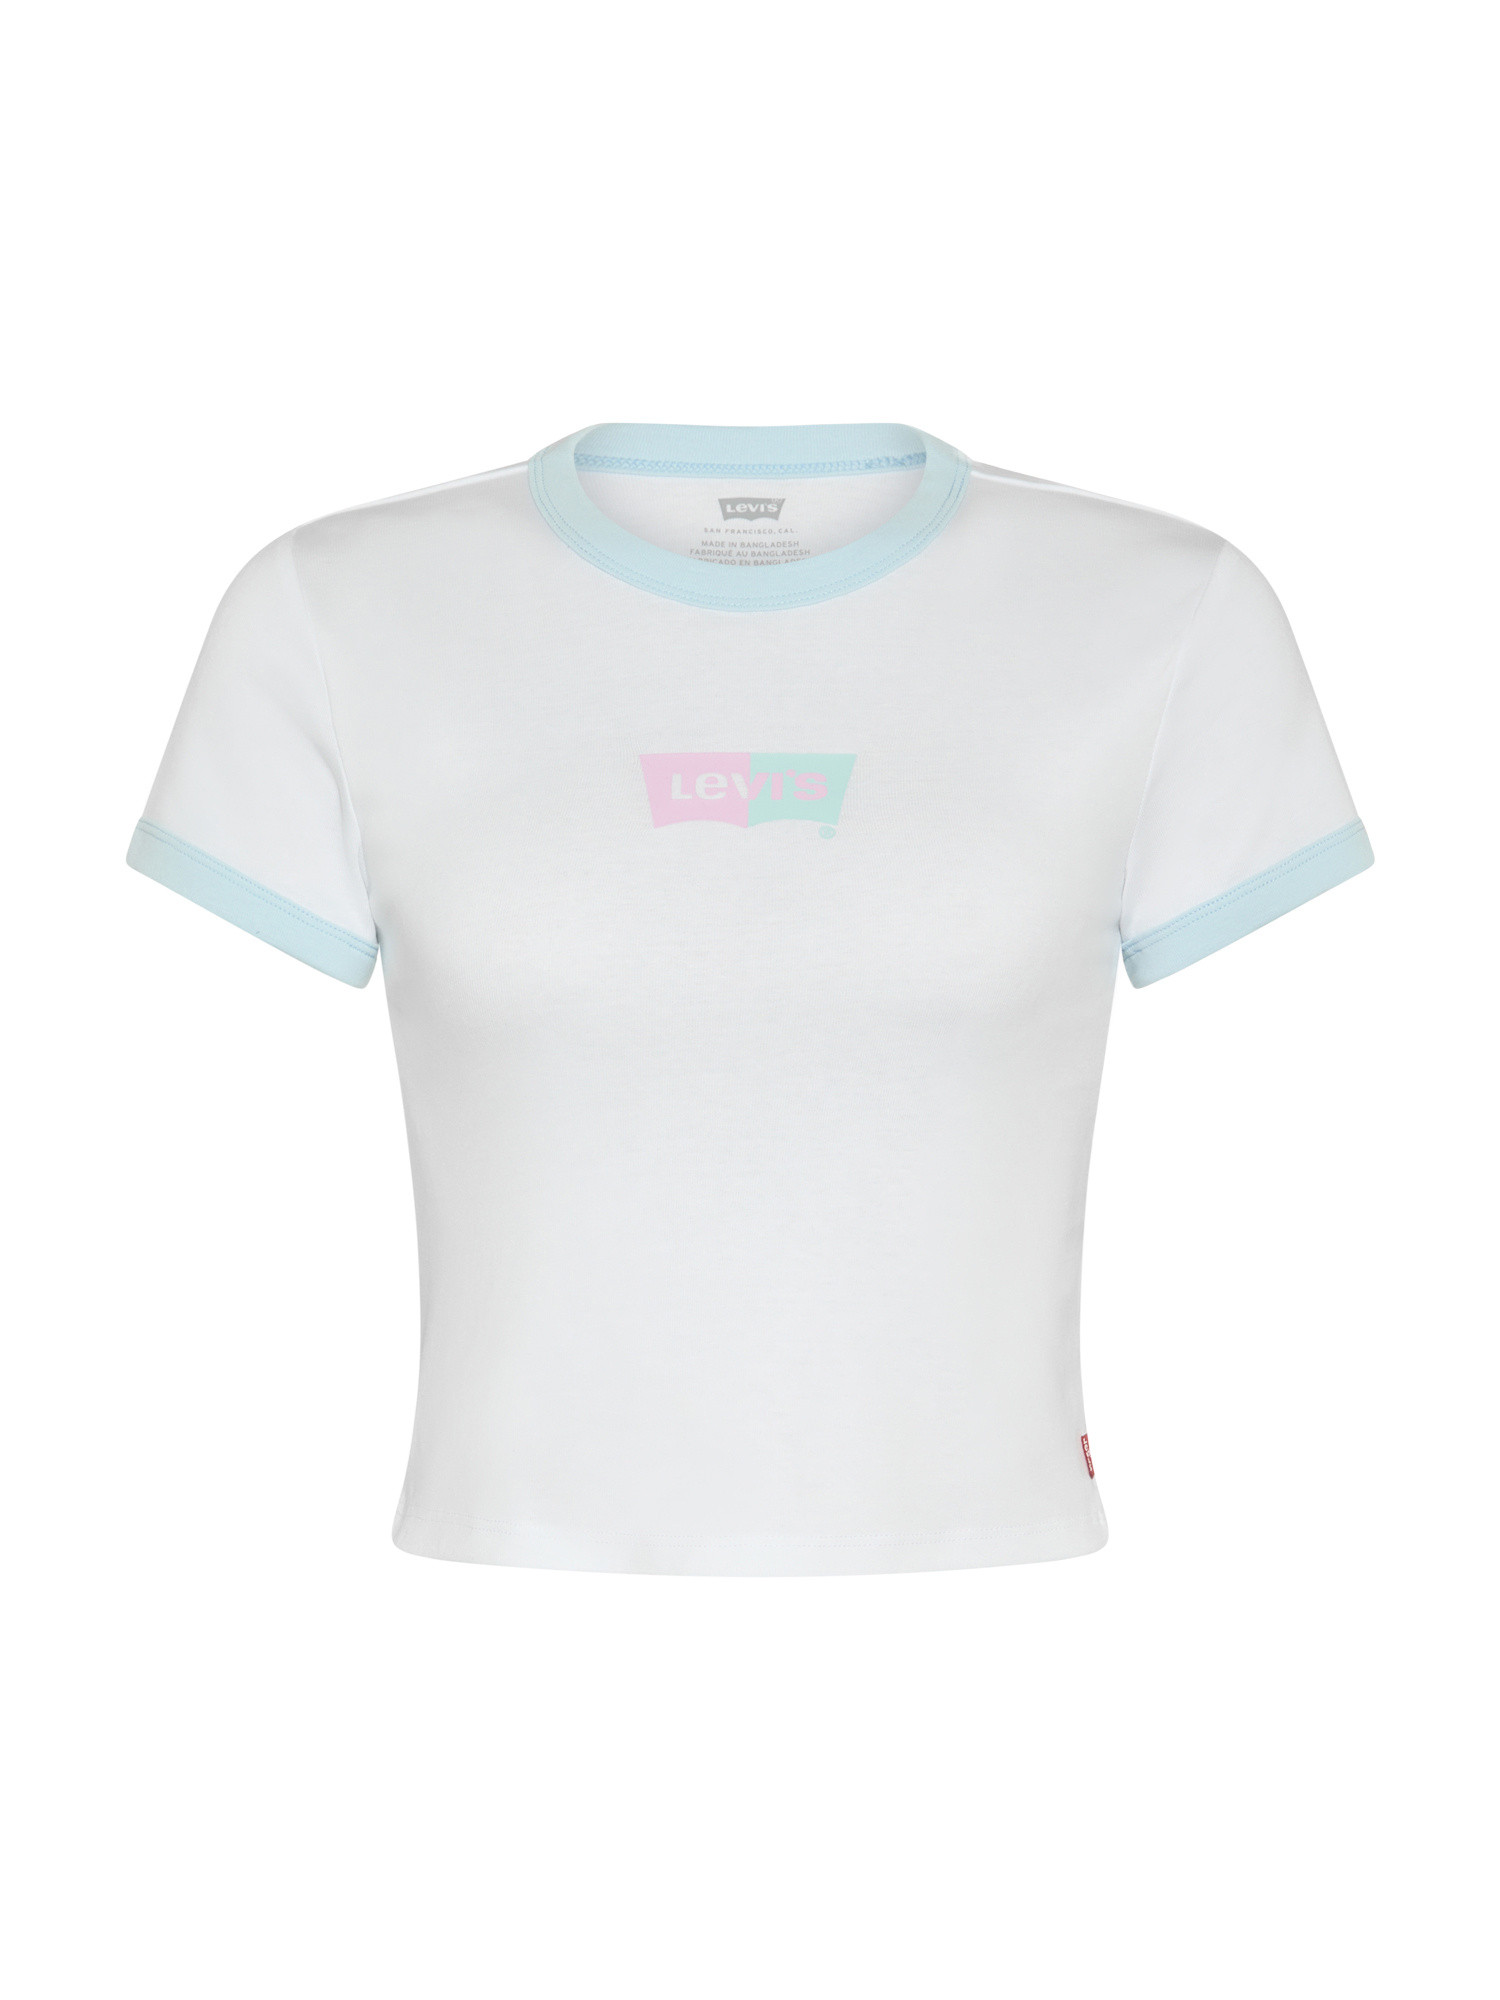 Levi's - T-shirt crop in cotone slim fit con logo, Bianco, large image number 0